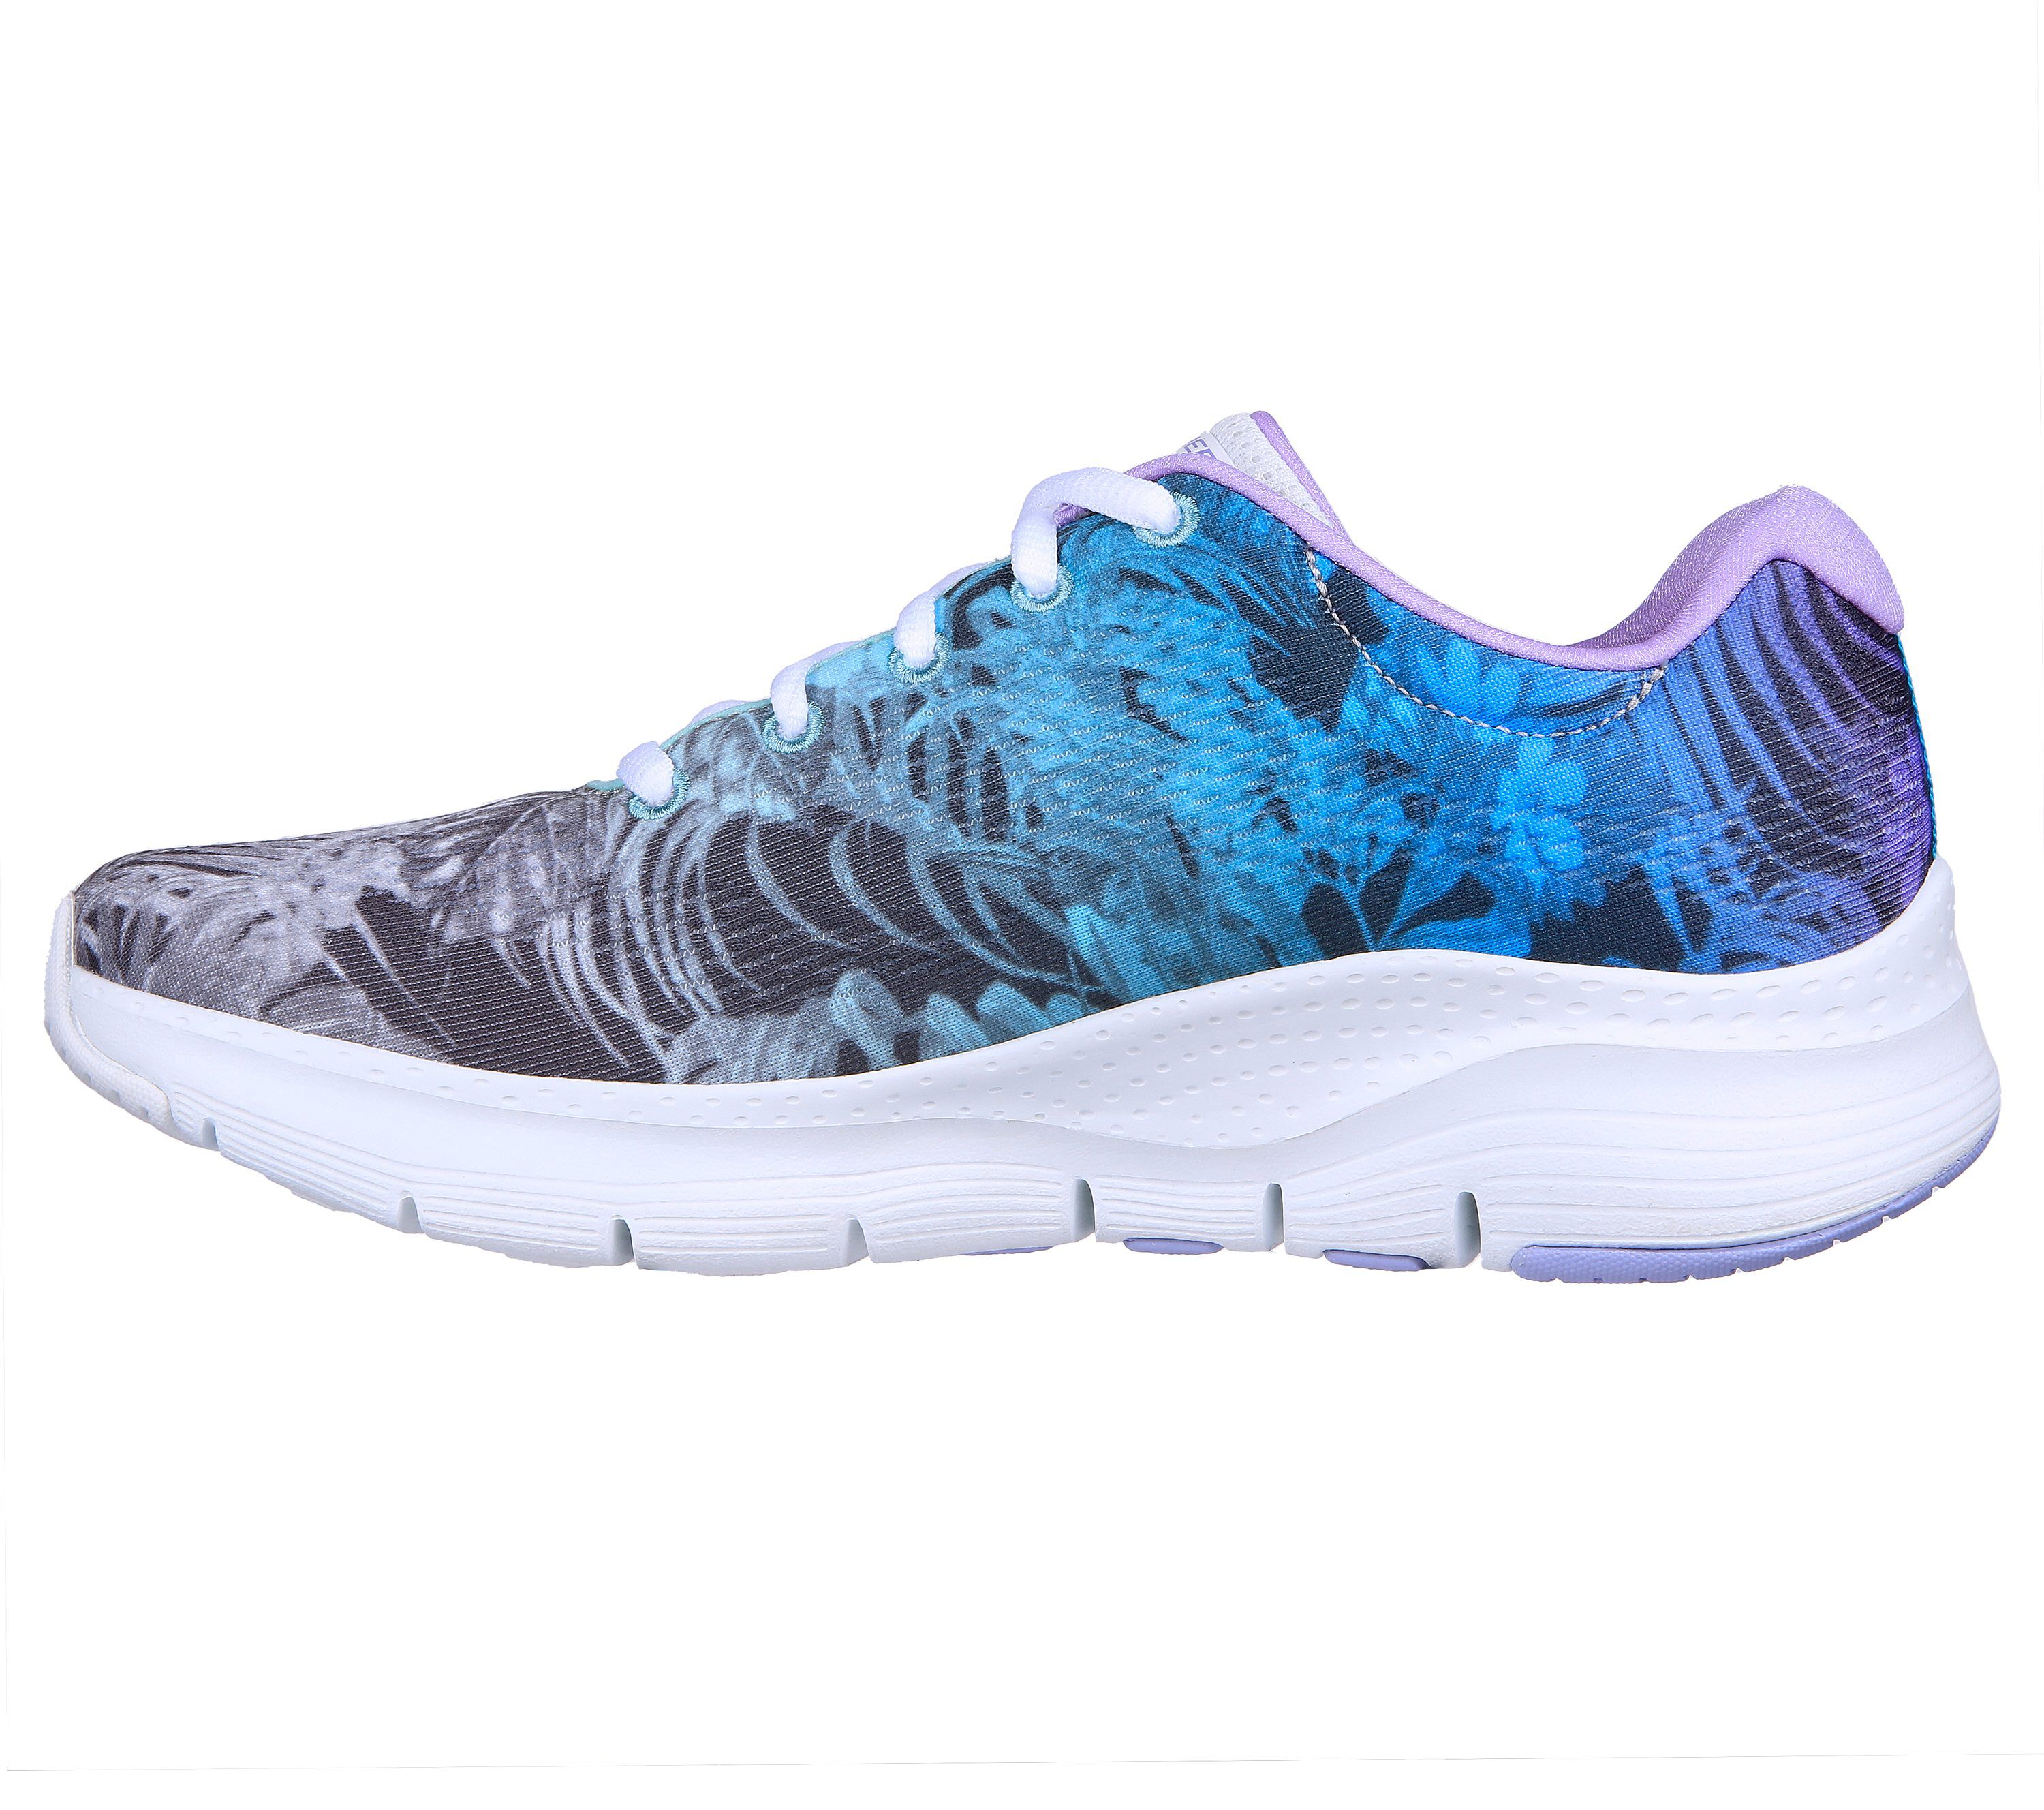 Arch Fit - New Tropic | SKECHERS